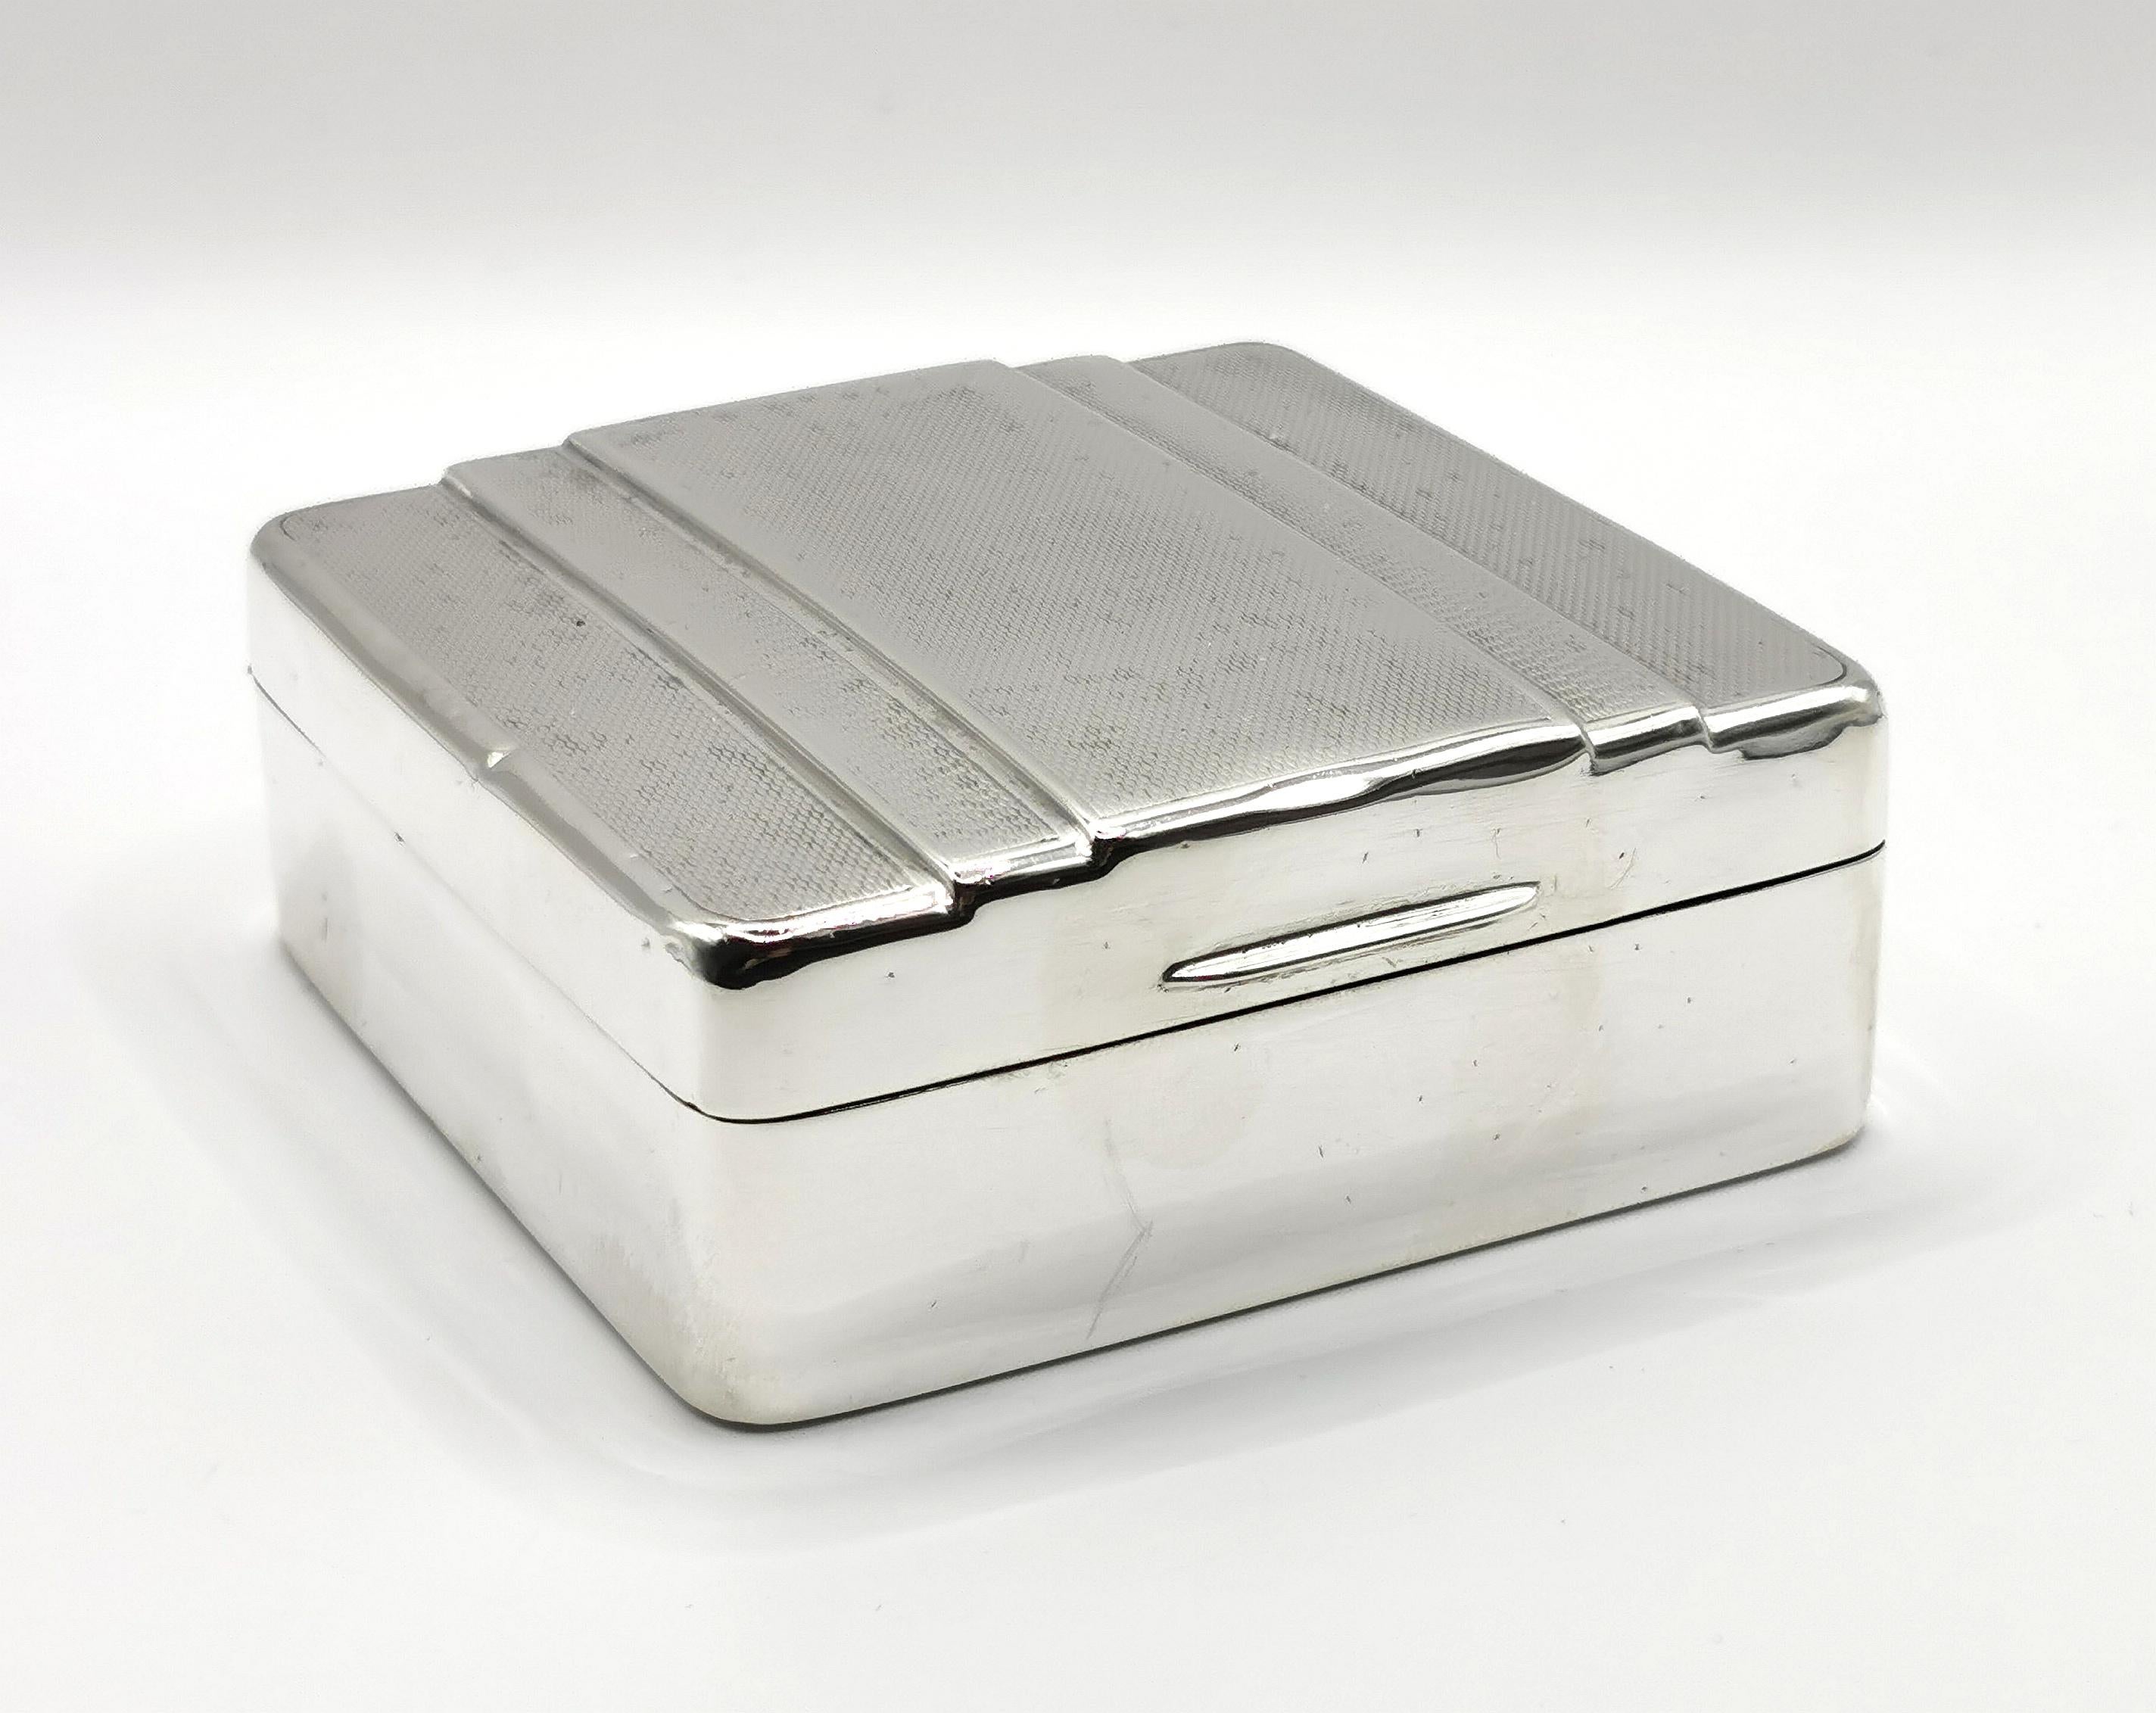 A stylish vintage Art Deco era sterling silver cigarette box.

This is a single sized box, with storage for multiple standard sized cigarettes.

The box has is engine turned to the lid with a stepped design.

The body of the box has a smooth